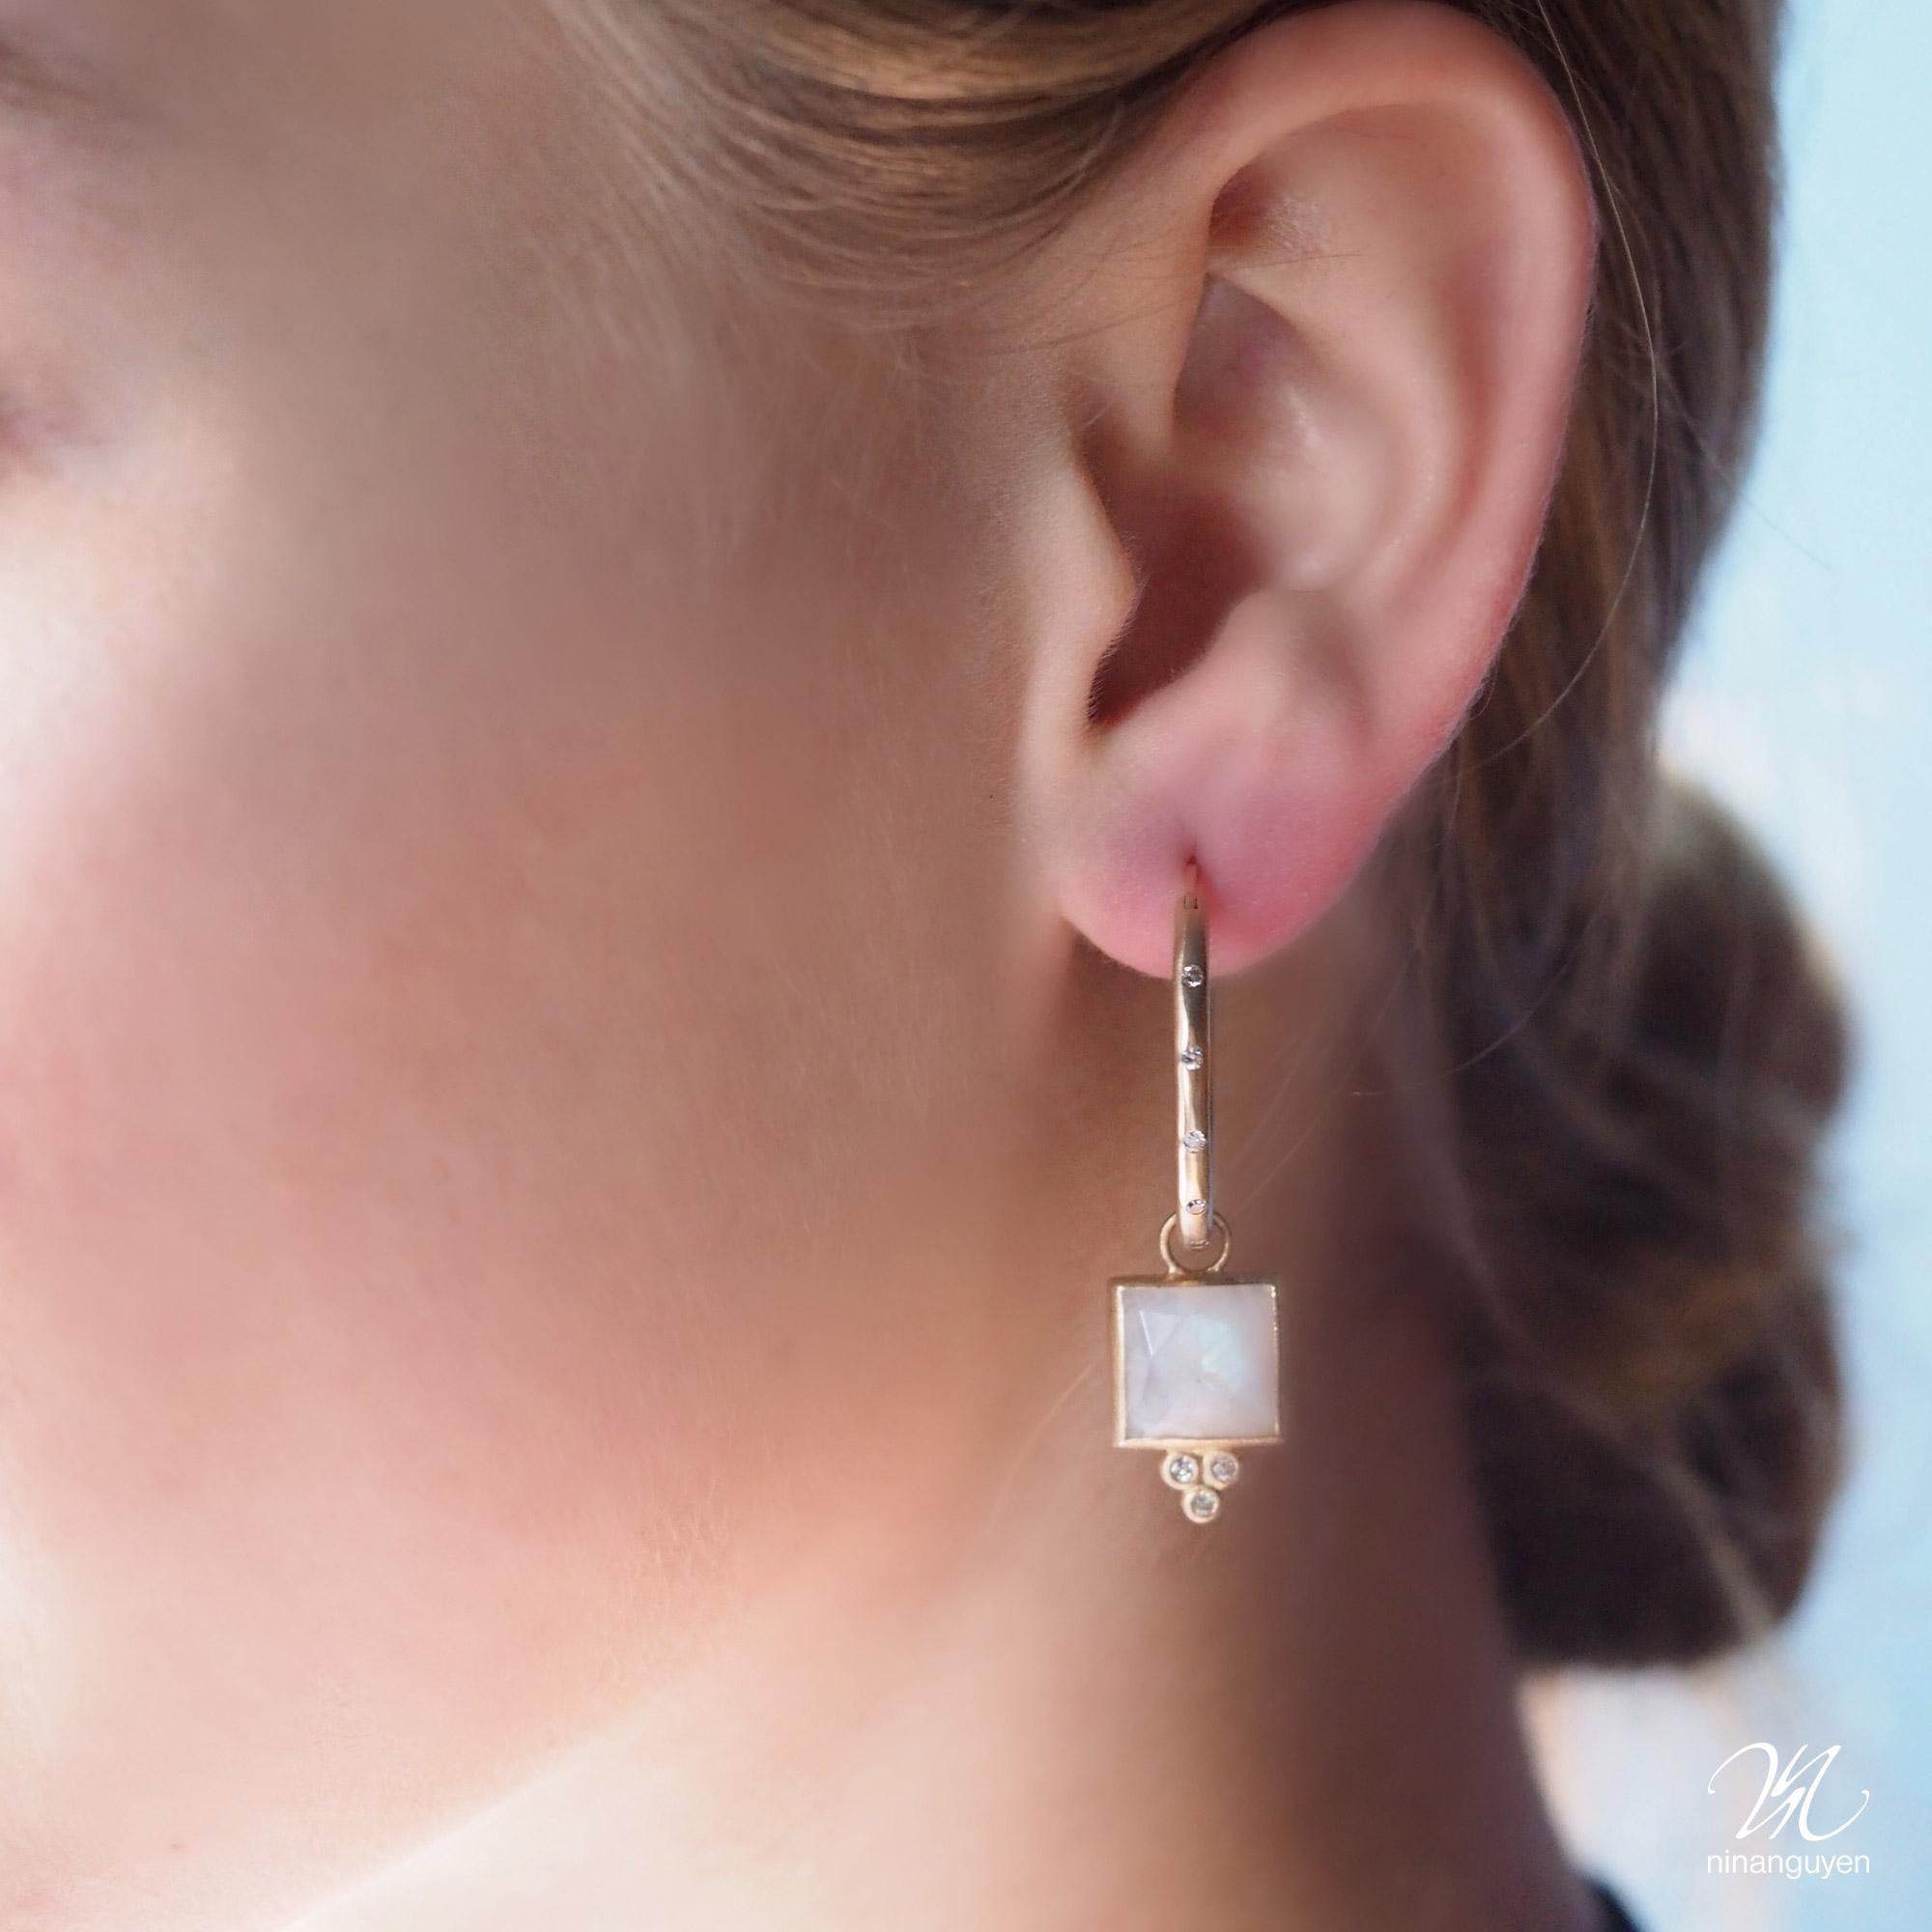 Square dance: Designed with hand-faceted moonstone framed in a textured gold, our diamond-accented Ariana Gold Charms pair with any of our hoops and mix well with other styles.

Nina Nguyen Design's patent-pending earrings have an element on the